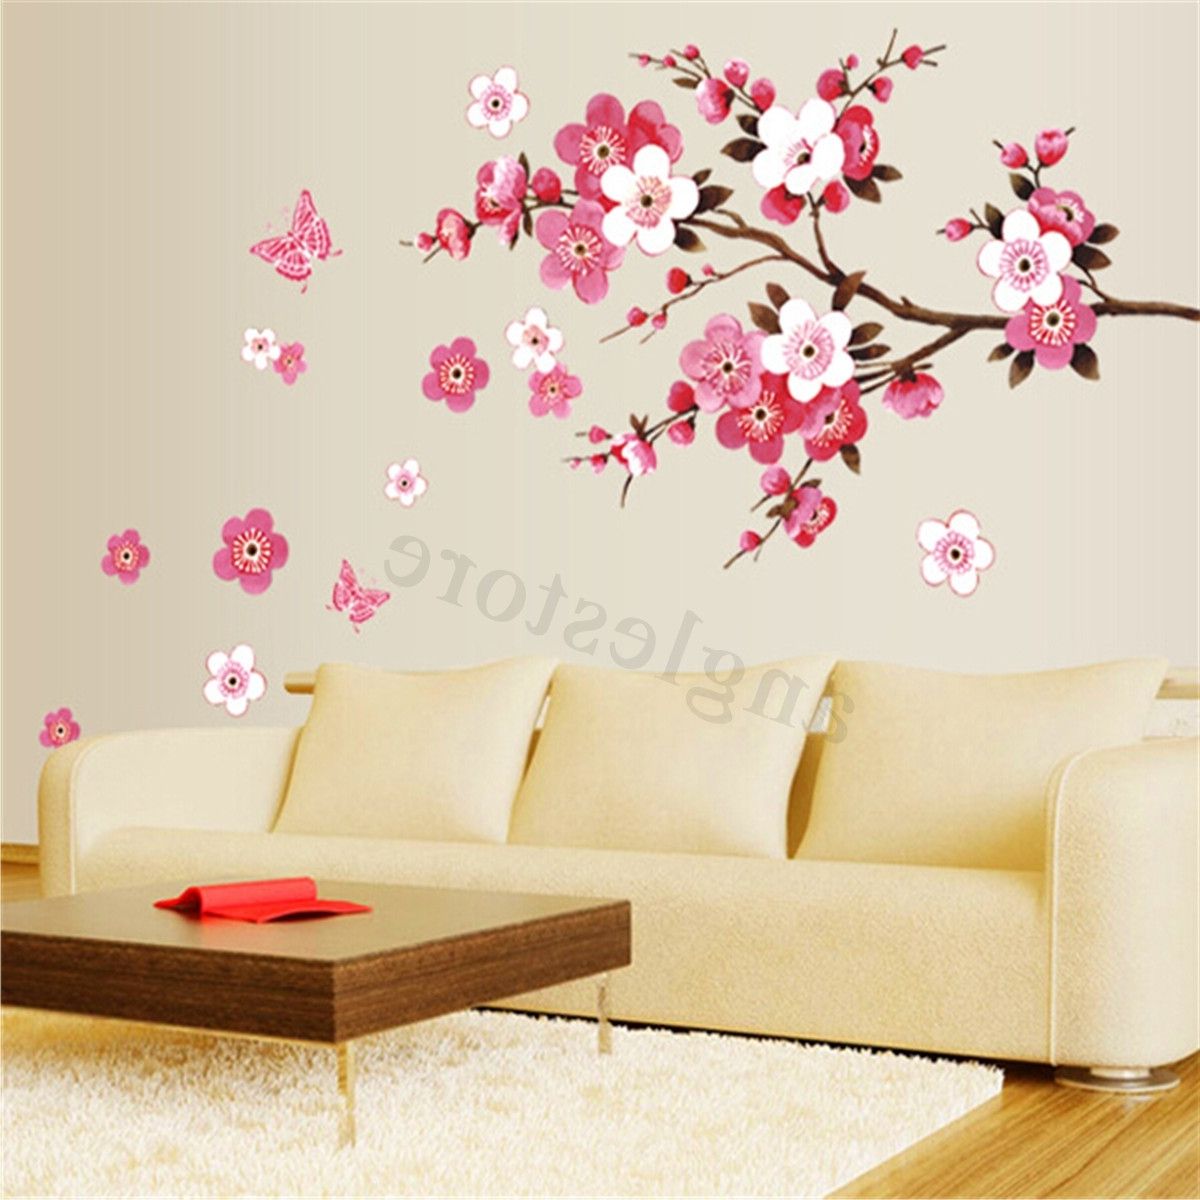 Most Popular Wall Sticker Art For Large Sakura Flower Removable Wall Sticker Paper Mural Art Decal (View 7 of 15)